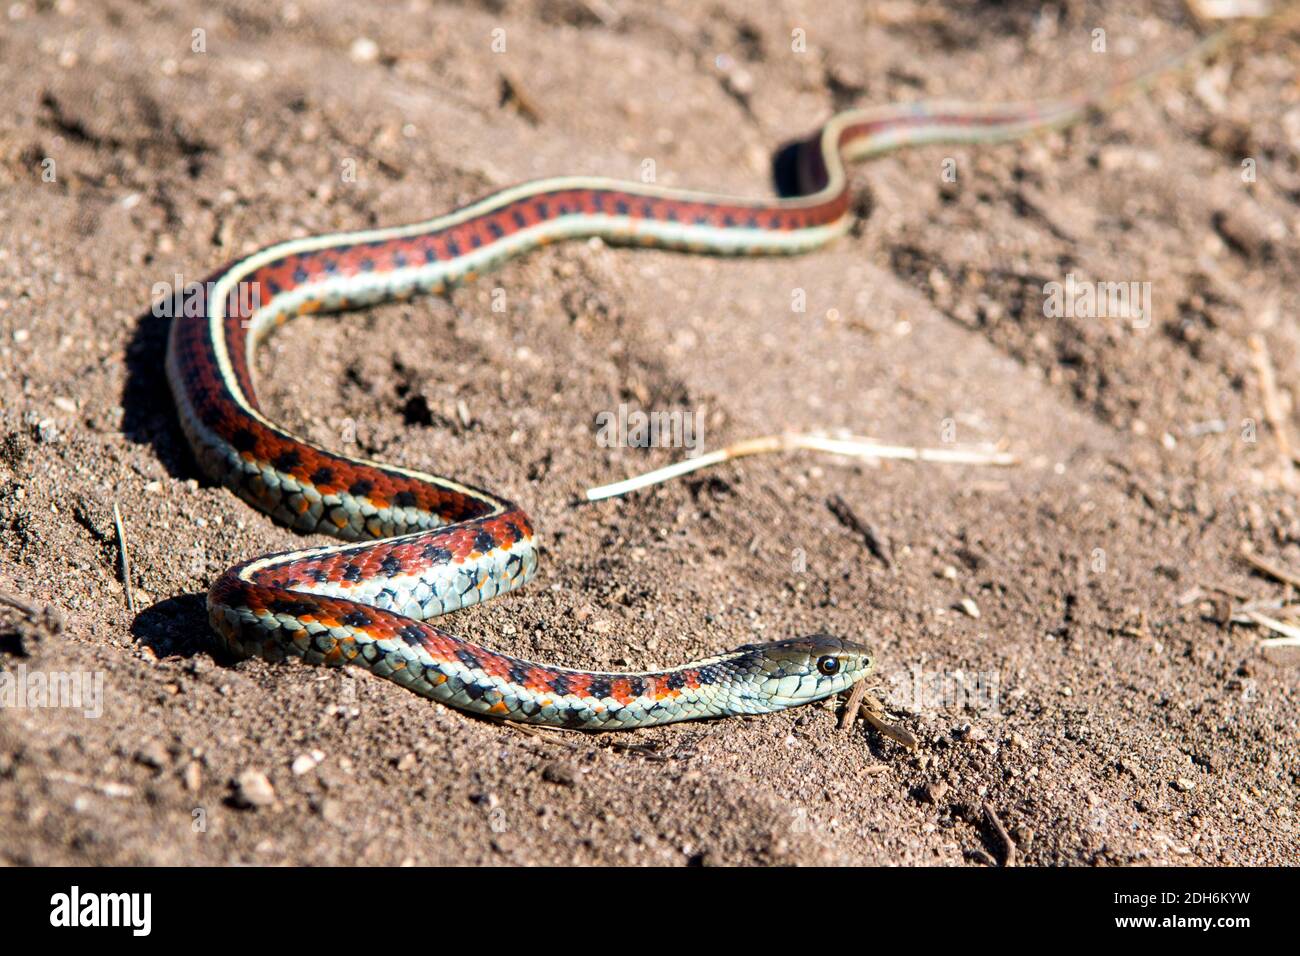 California Red-Sided Garter snake in sand found on Northern California Coast Stock Photo